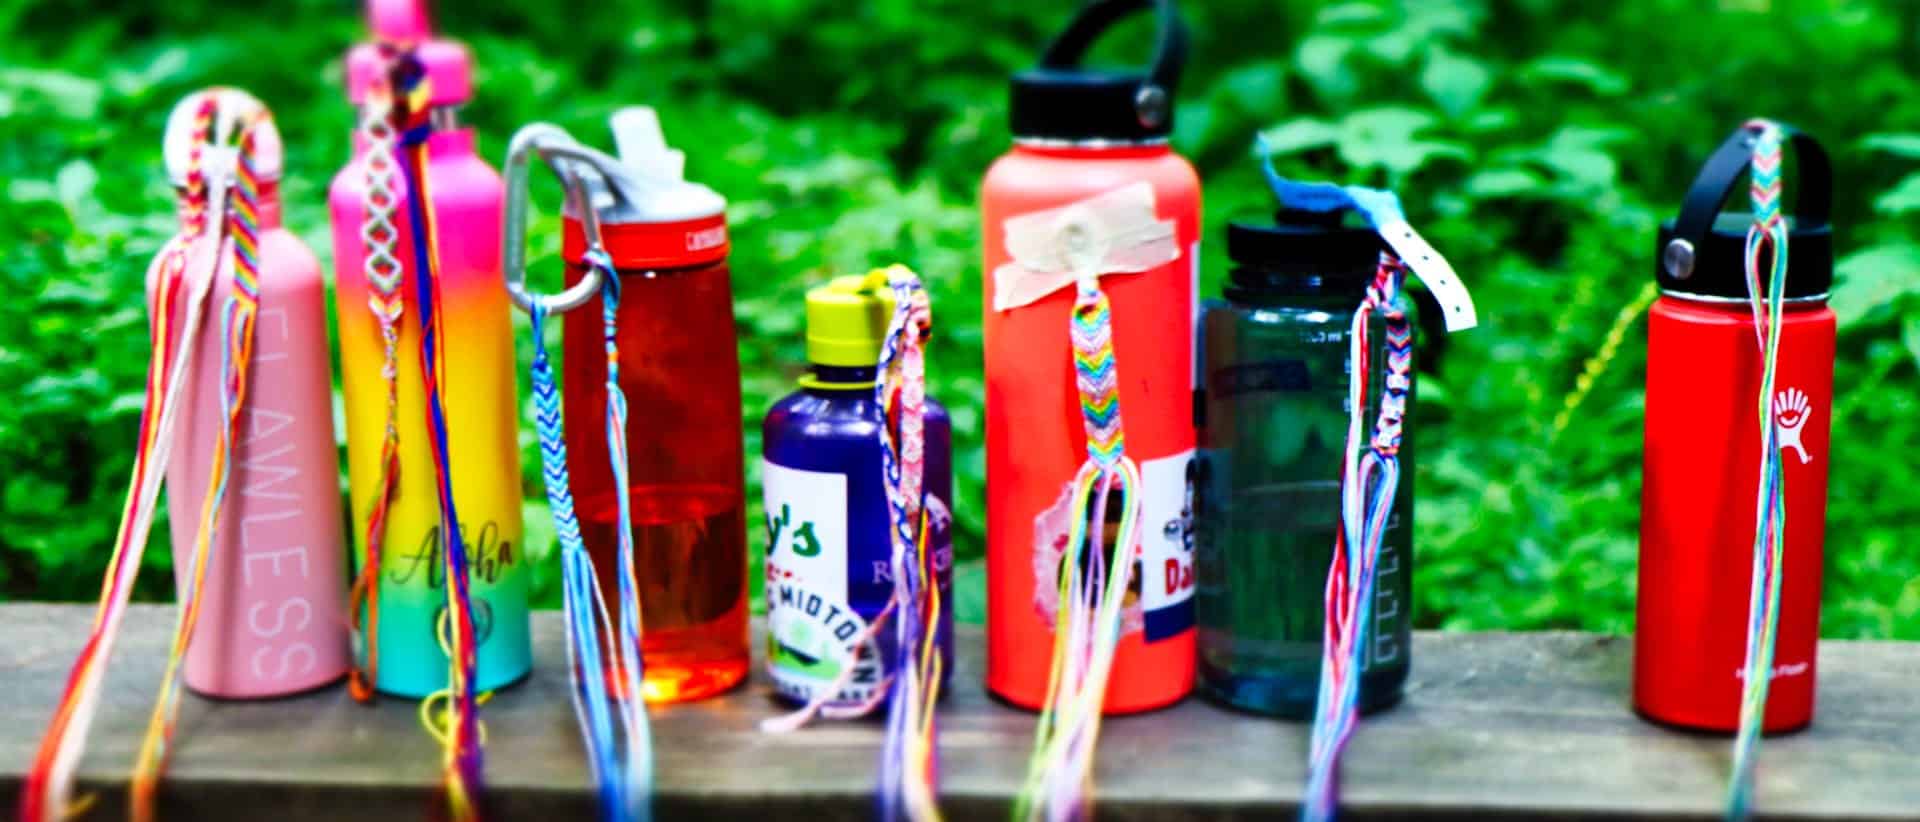 row of camp water bottles with friendship bracelets tied on